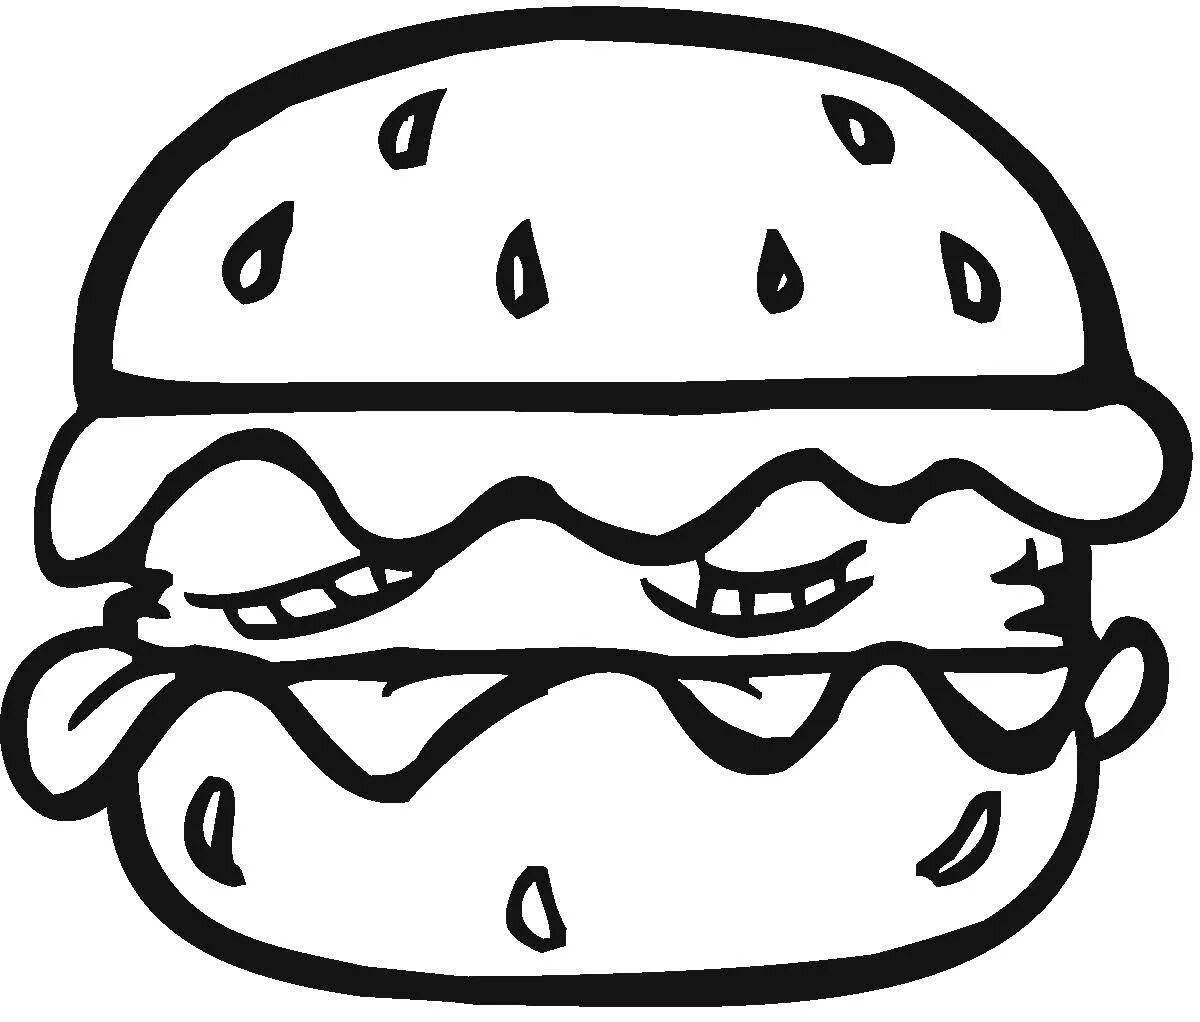 Coloring page appetizing cheeseburger